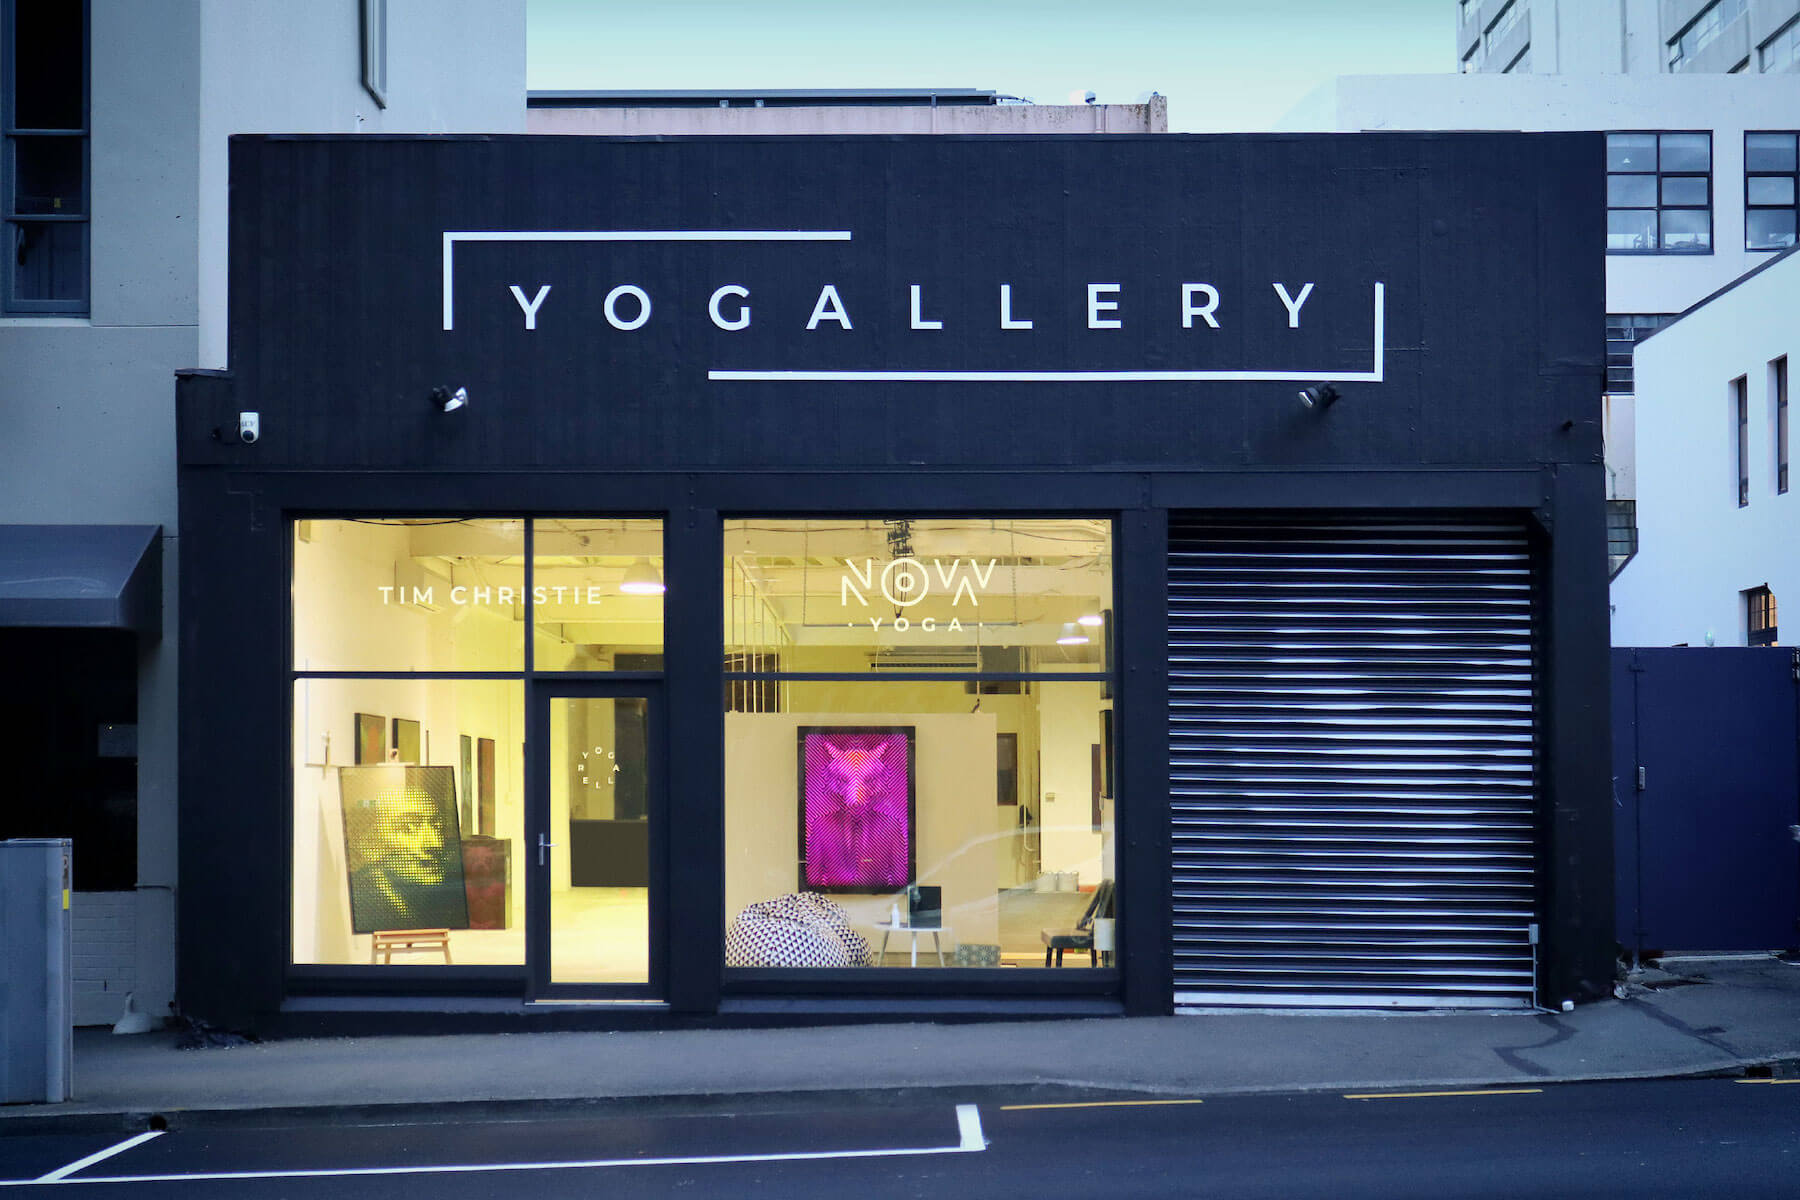 Yogallery - Combining Yoga and Art with Katie Christie